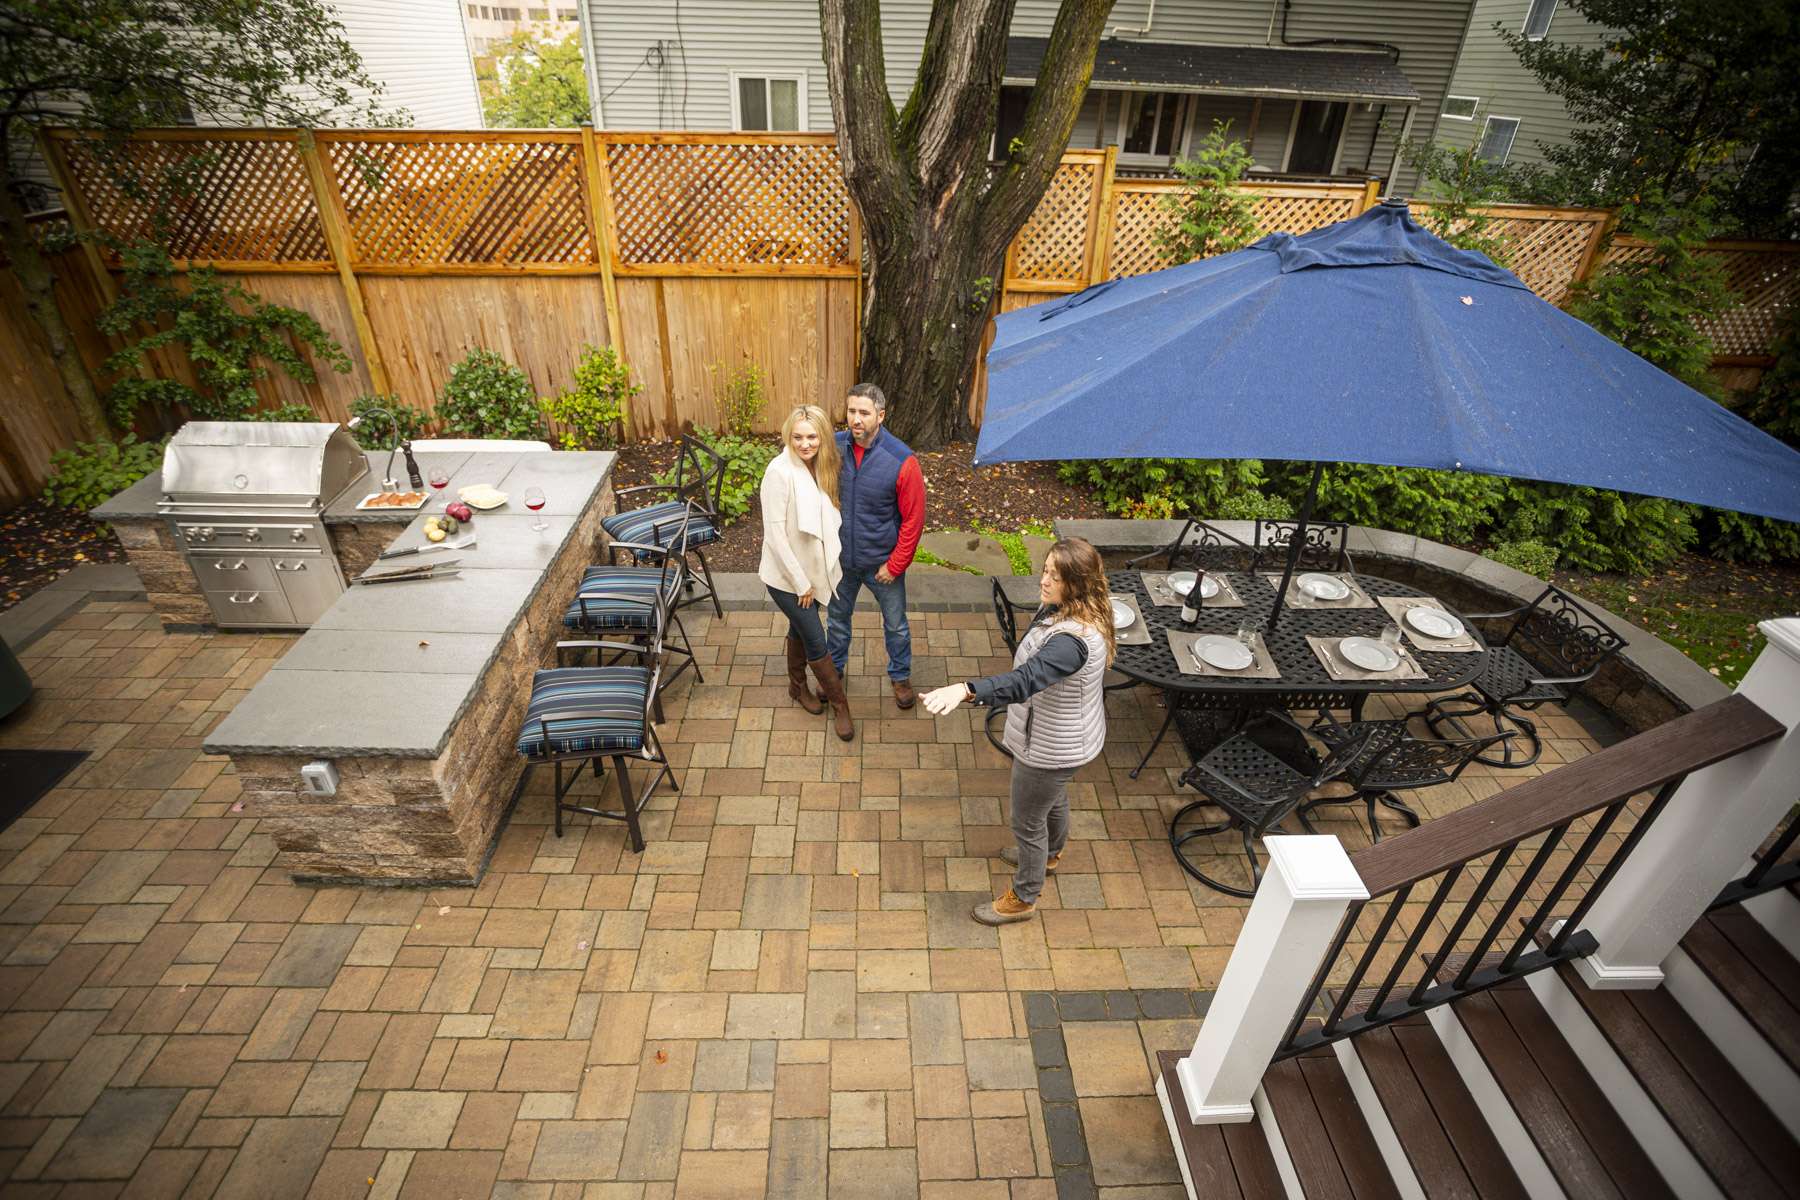 people on paver patio with outdoor kitchen in small backyard